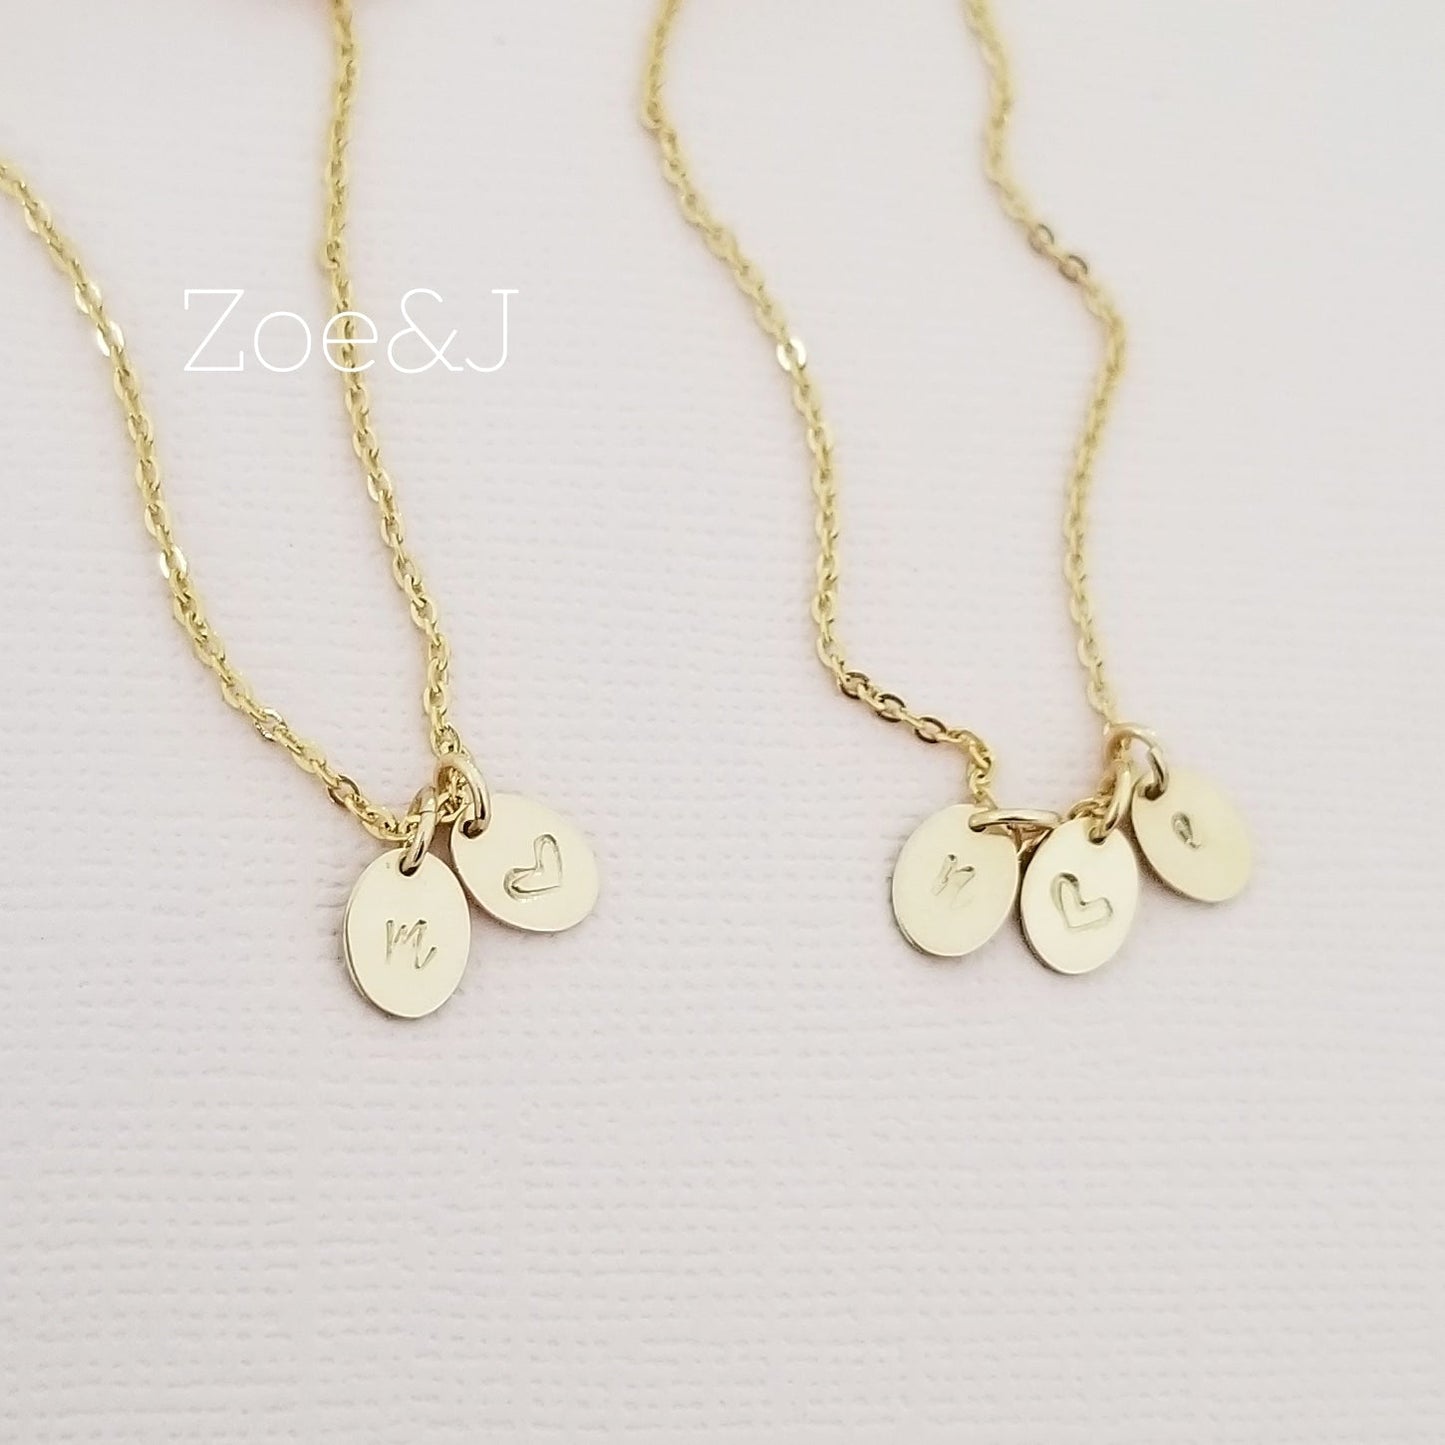 Petite Oval Coin Necklace